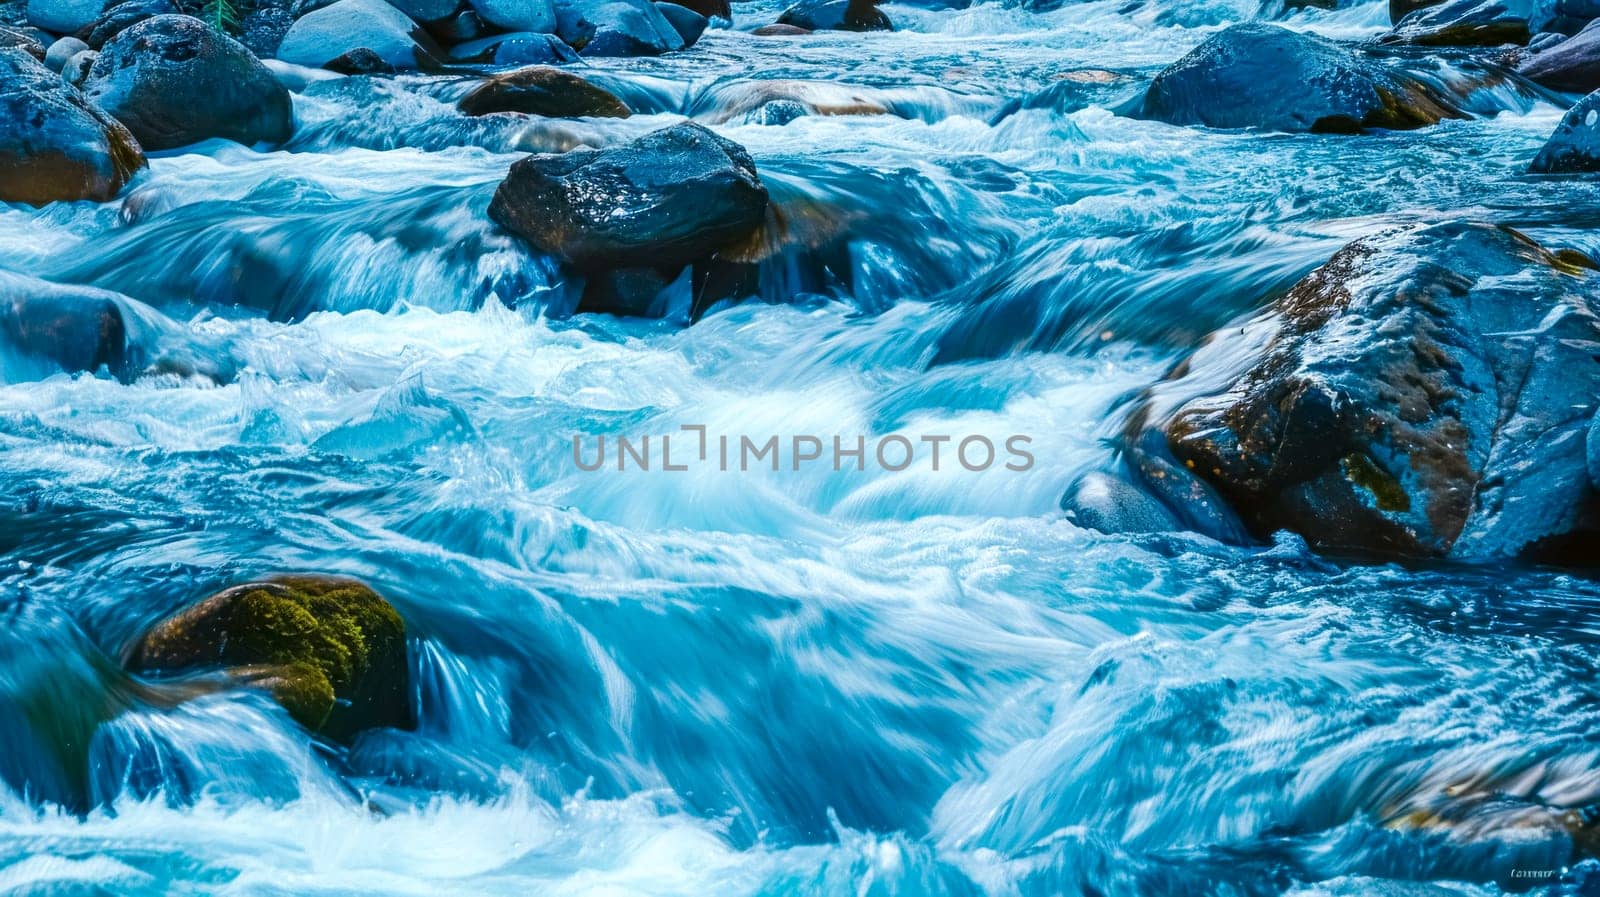 Tranquil mountain stream flowing over rocks by Edophoto